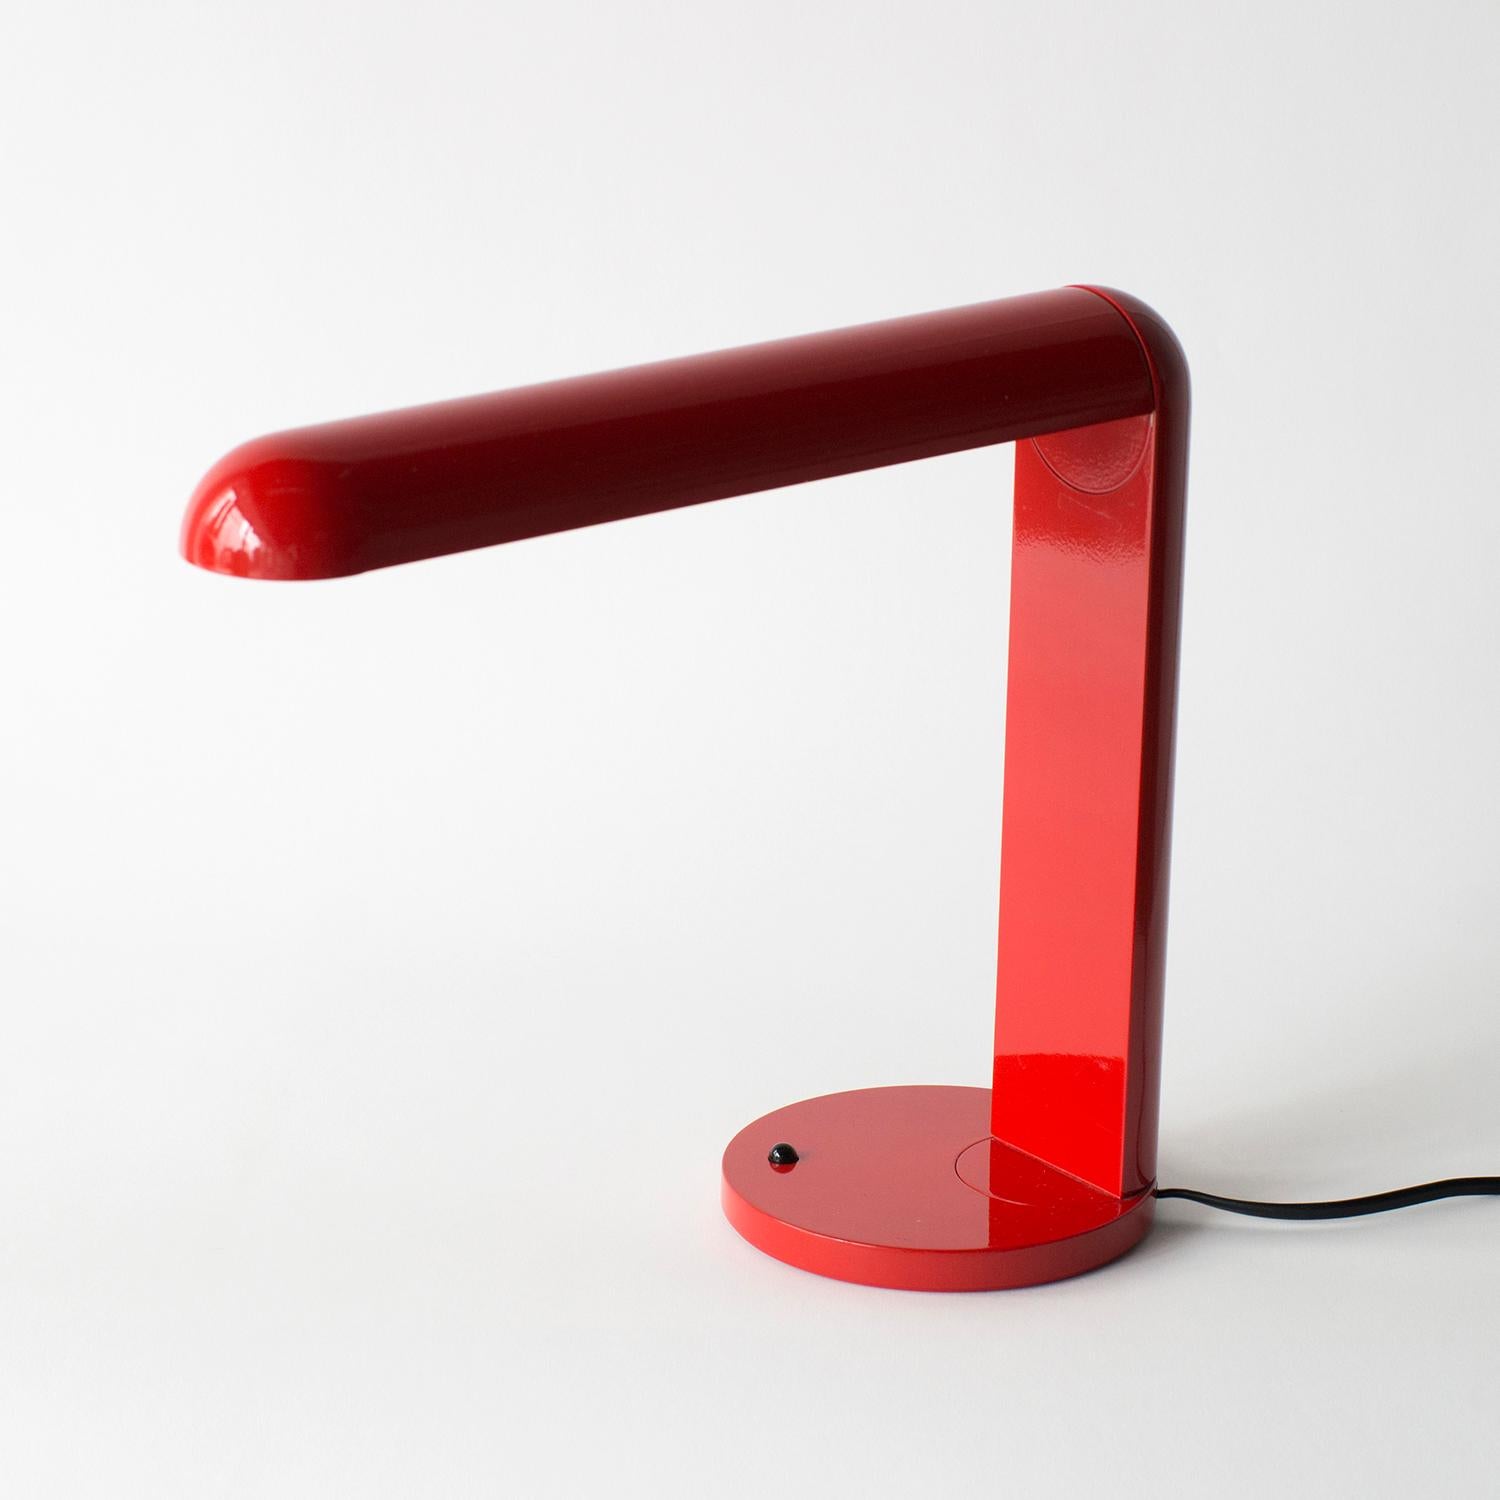 Portia desk lamp designed by Kunihide Oshinomi for Yamagiwa.
Shade is movable horizontally and able to turn around.